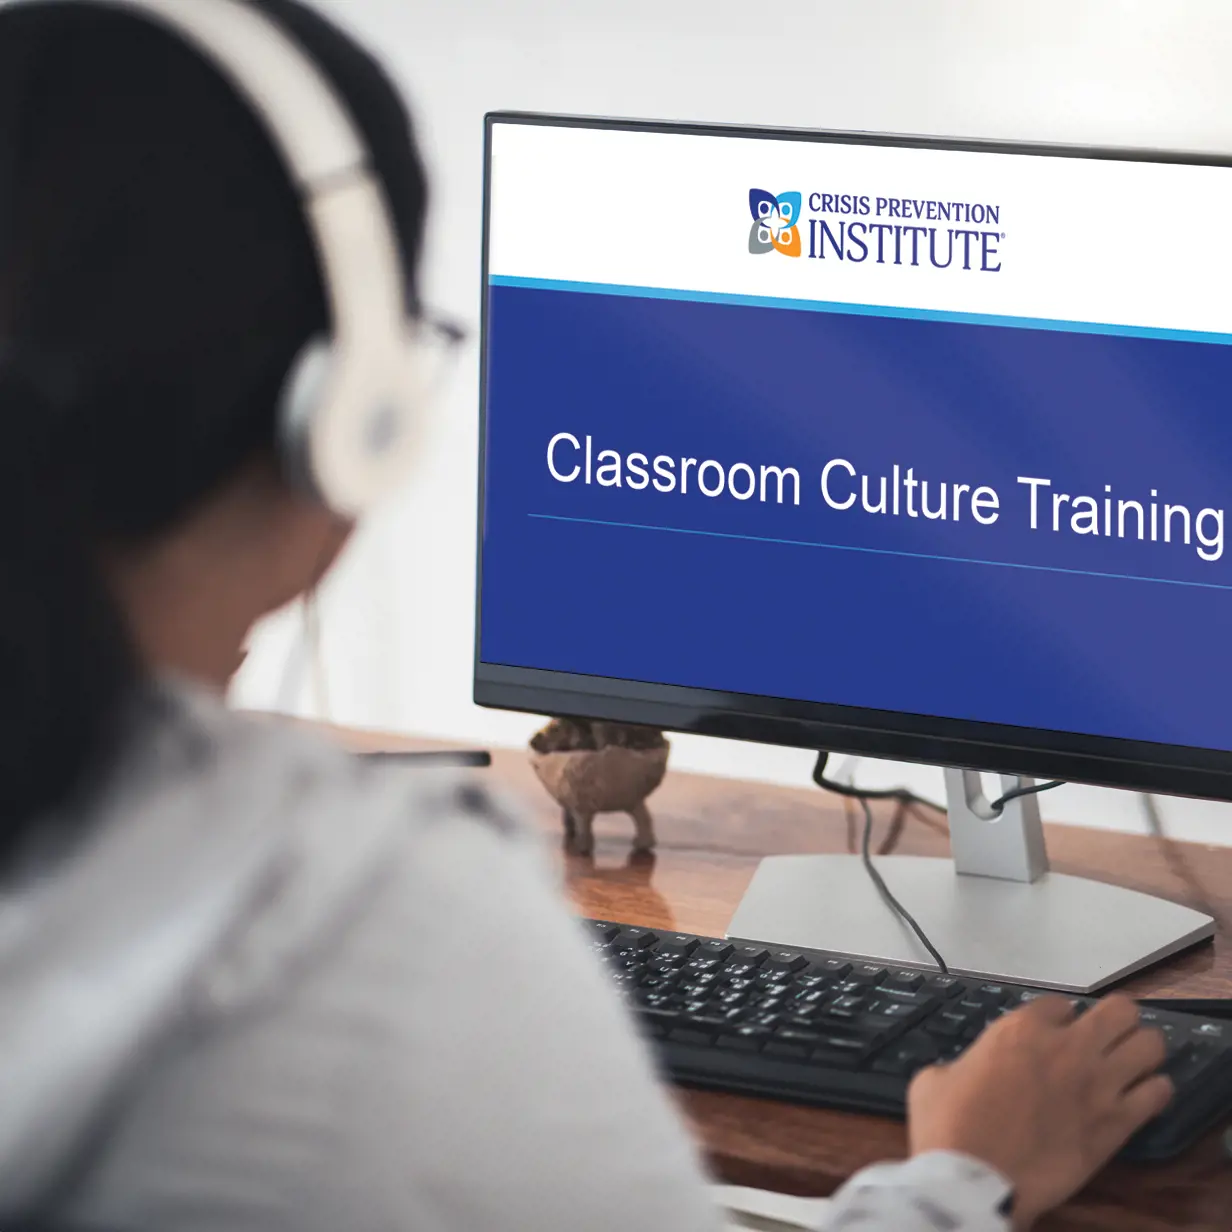 Woman with headphones watching Classroom Culture training on a laptop